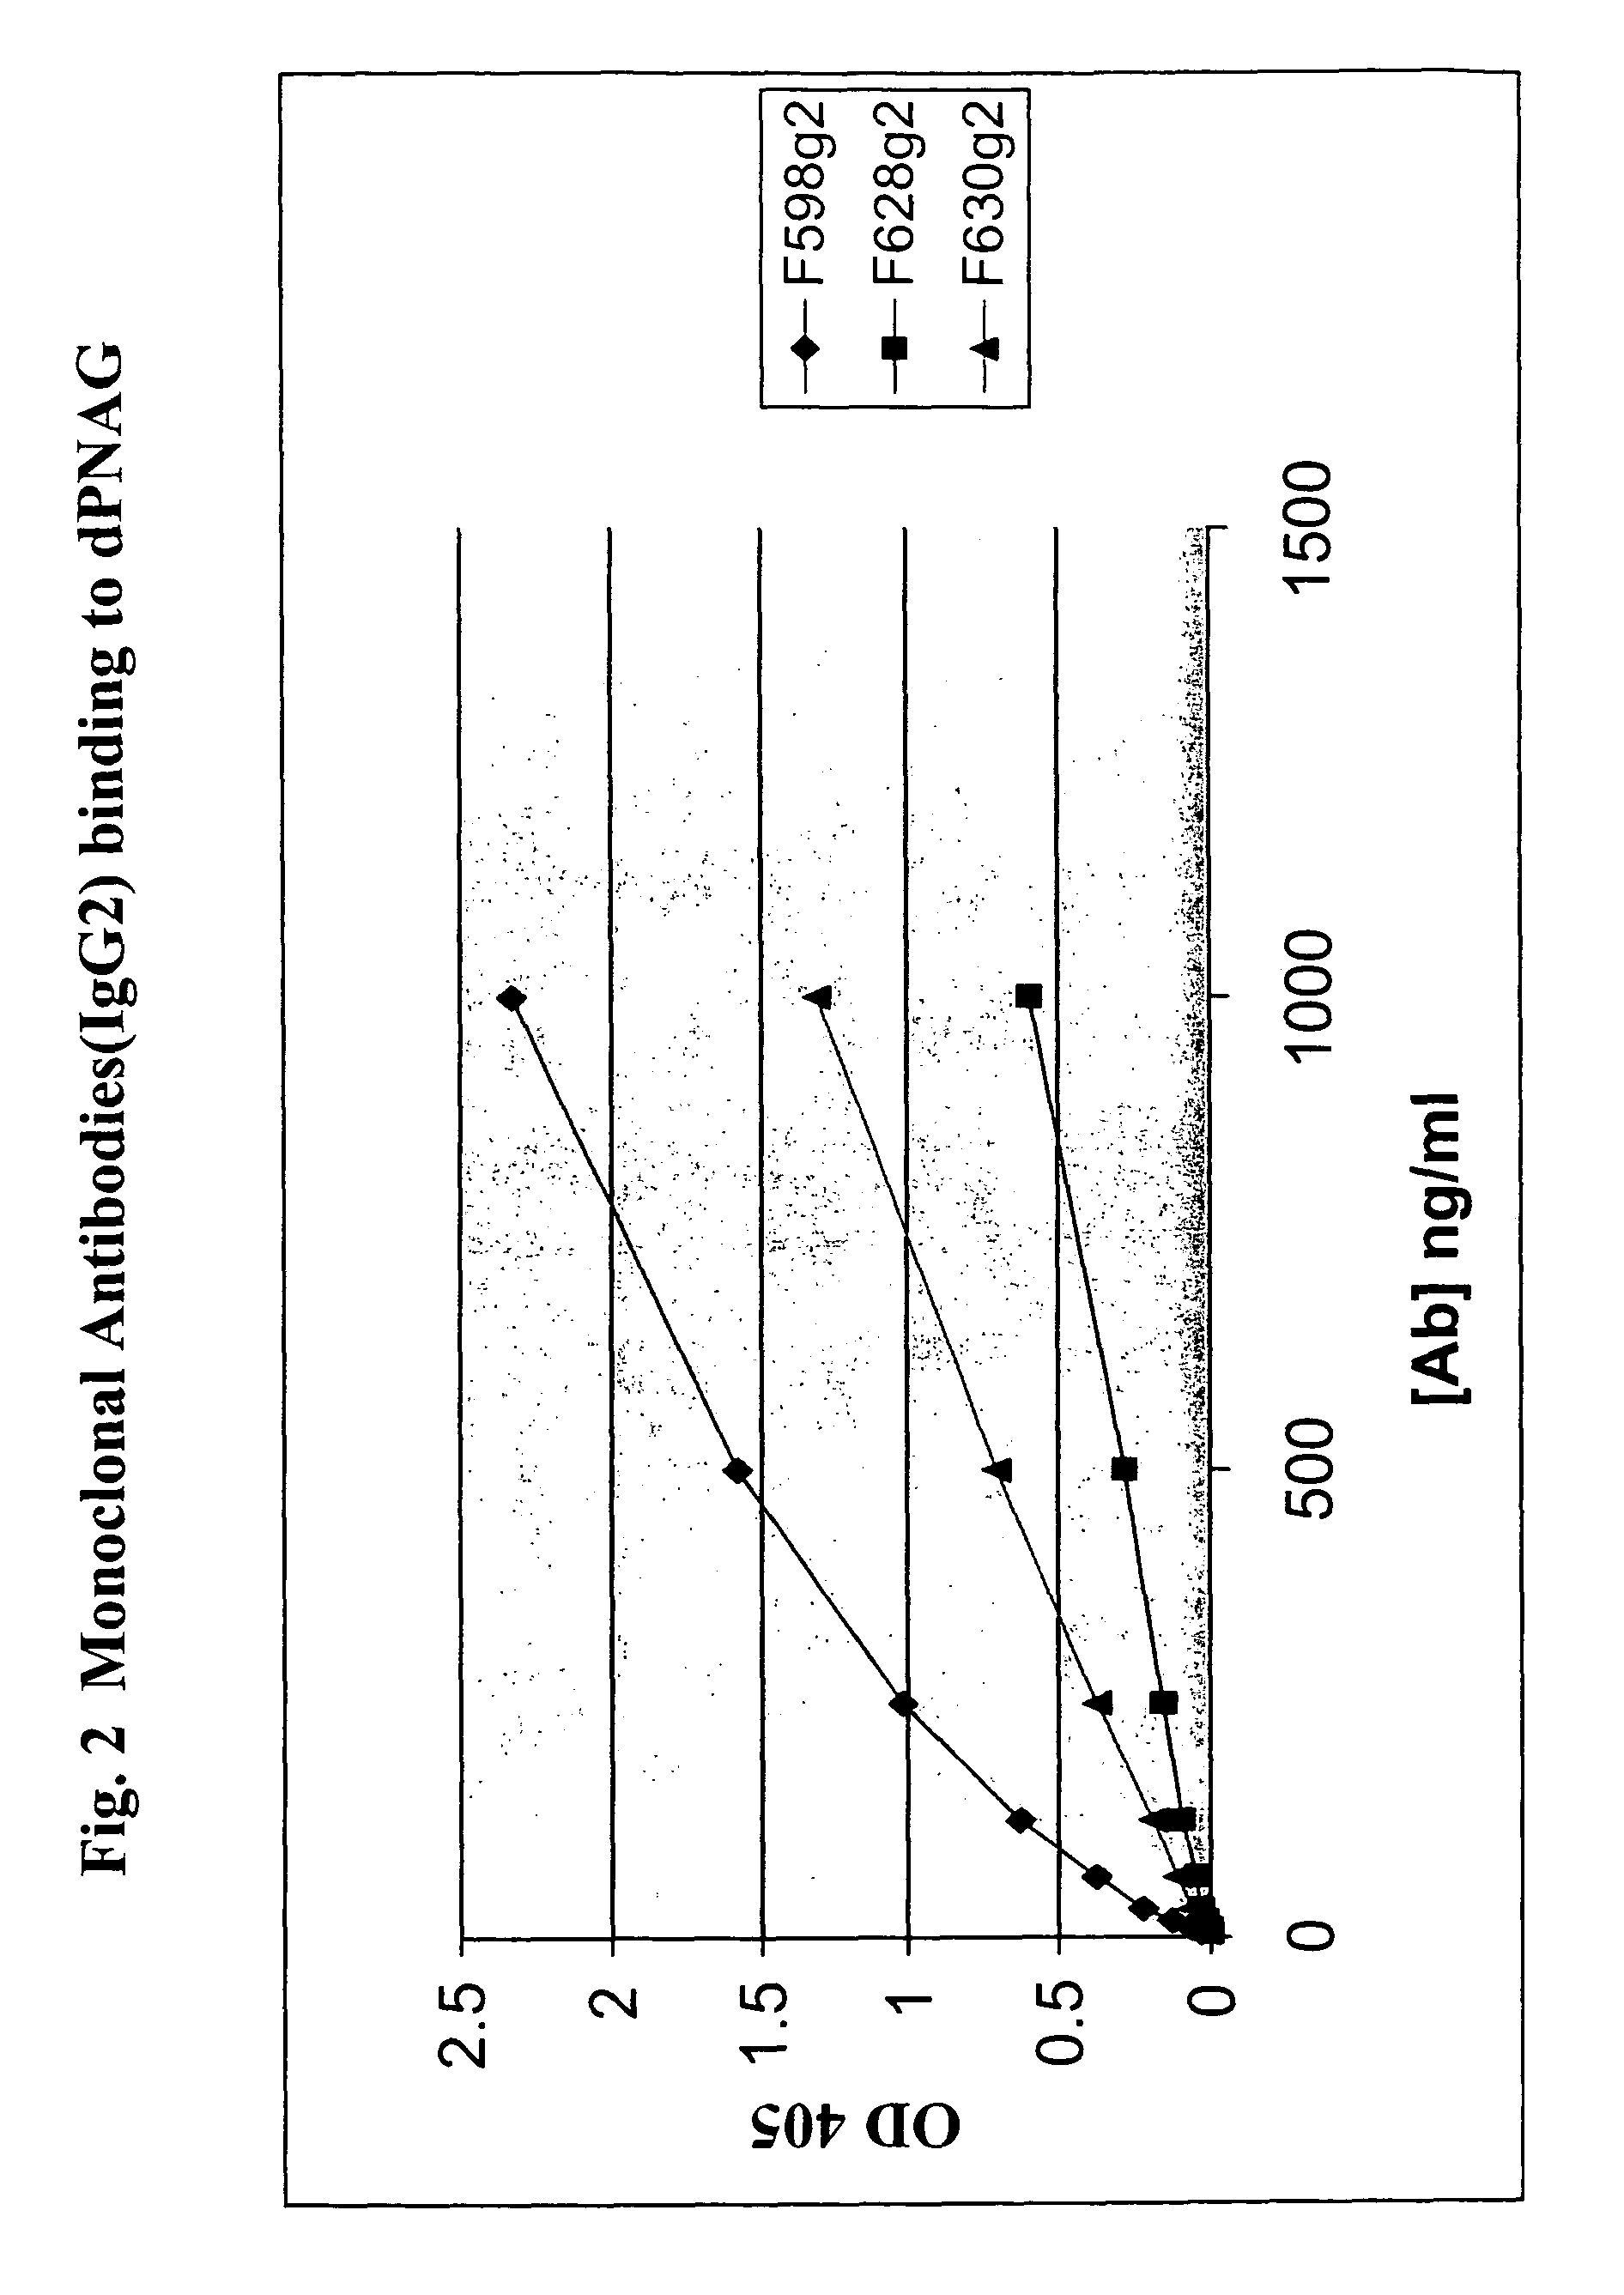 Poly-N-acetyl glucosamine (PNAG/dPNAG)-binding peptides and methods of use thereof